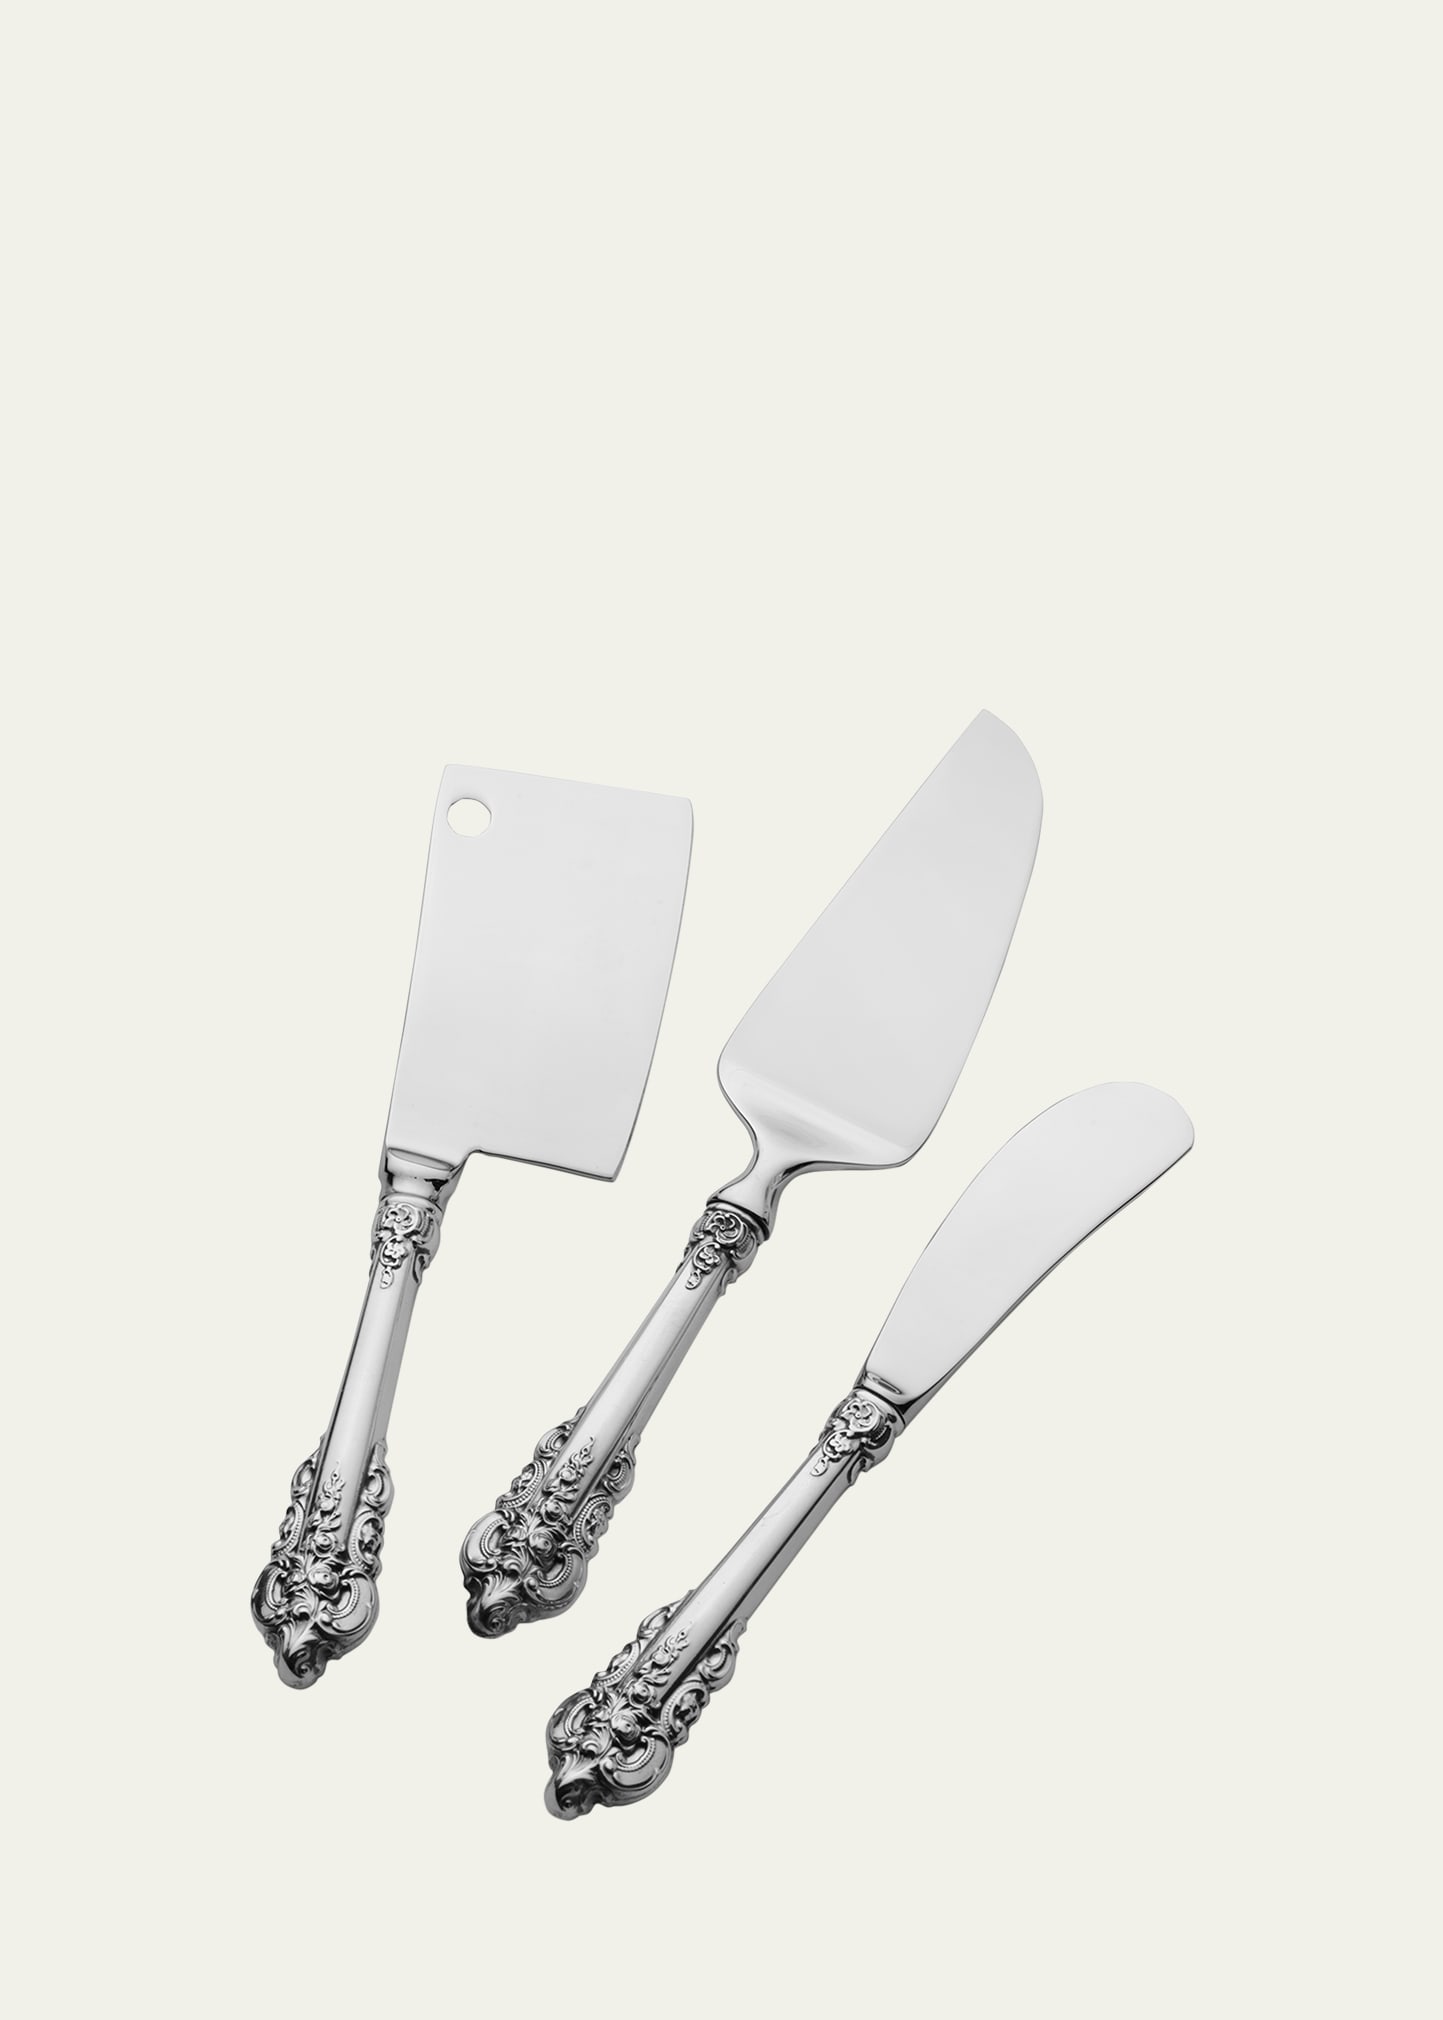 Grand Baroque 3-Piece Cheese Knife Set